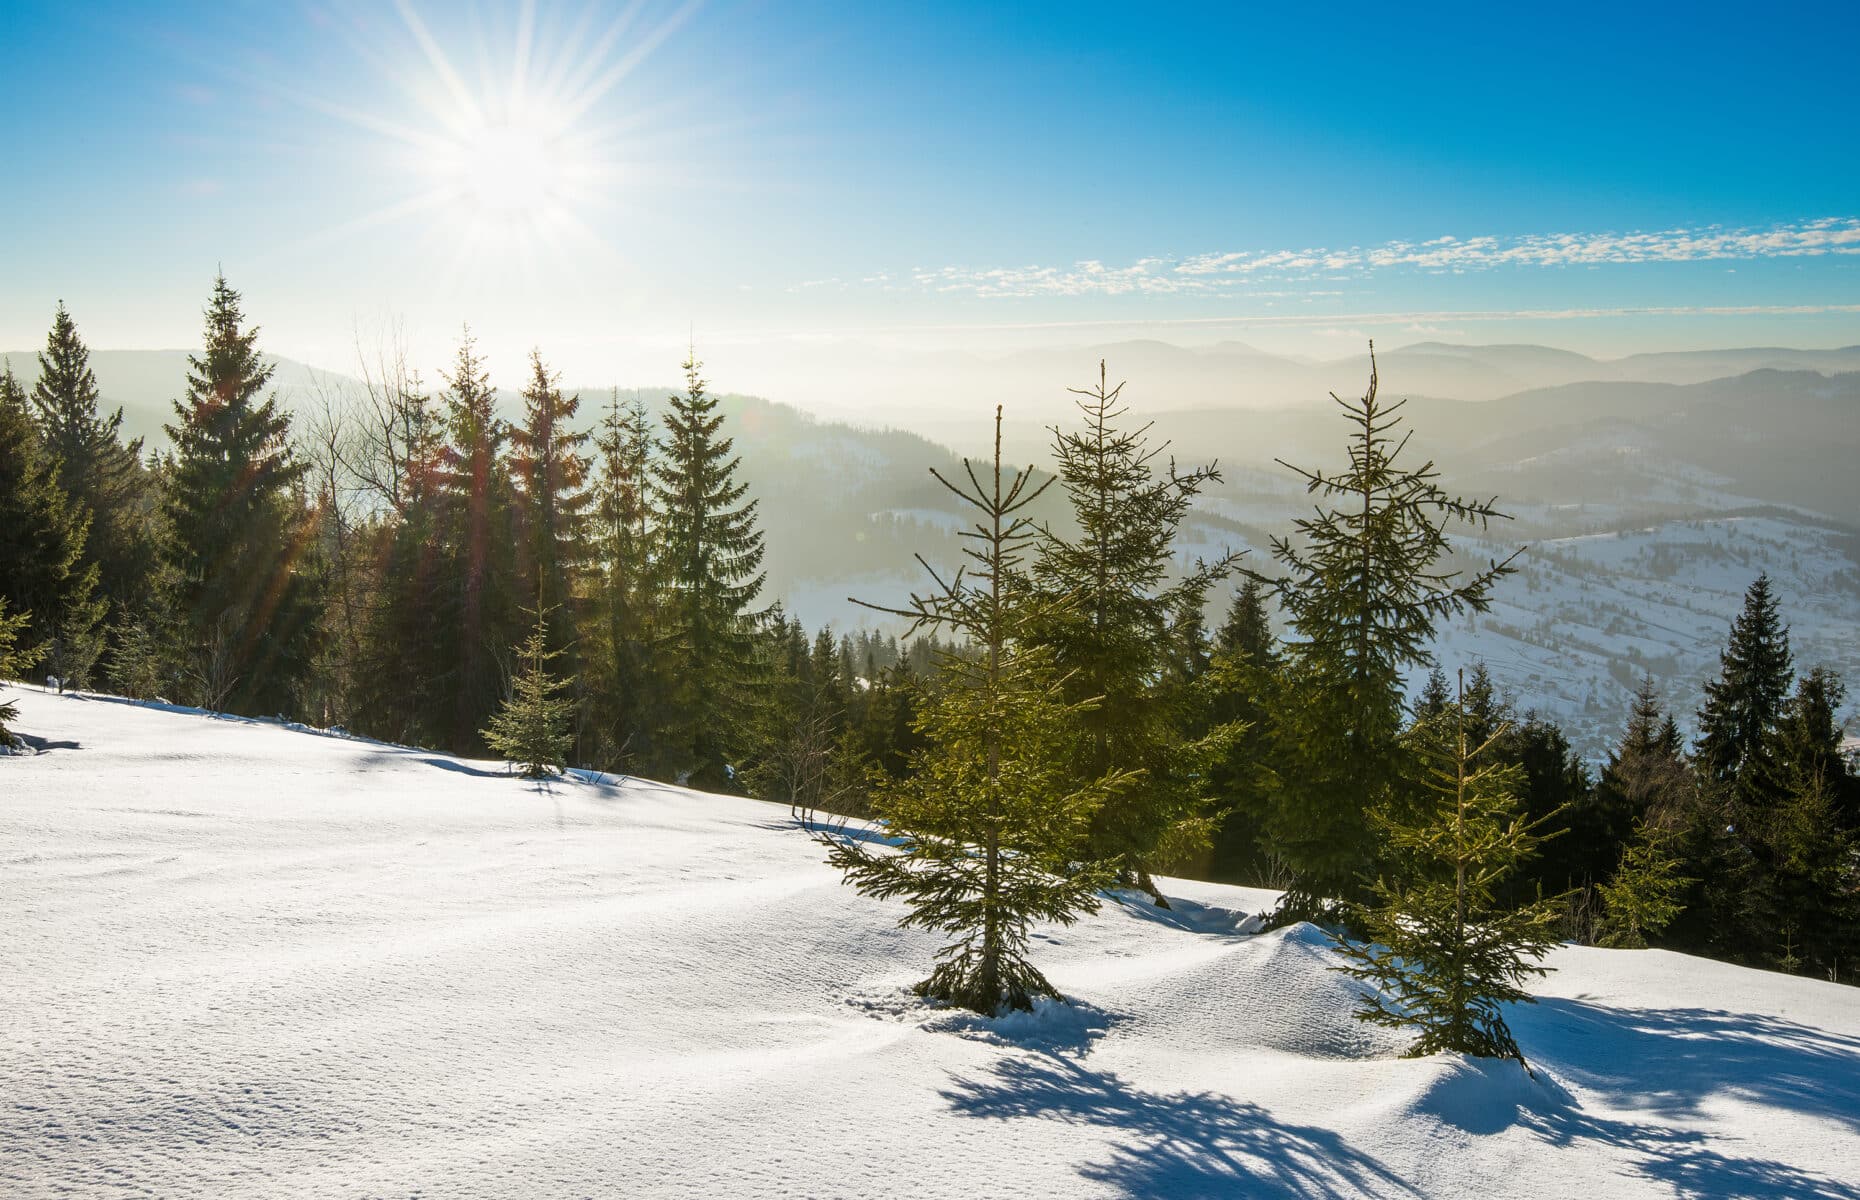 Bewitching view of the ski slope with a beautiful view of the snowy hill coniferous forest and sunny mountain ranges on a clear frosty day. Concept of relaxation in a ski resort.